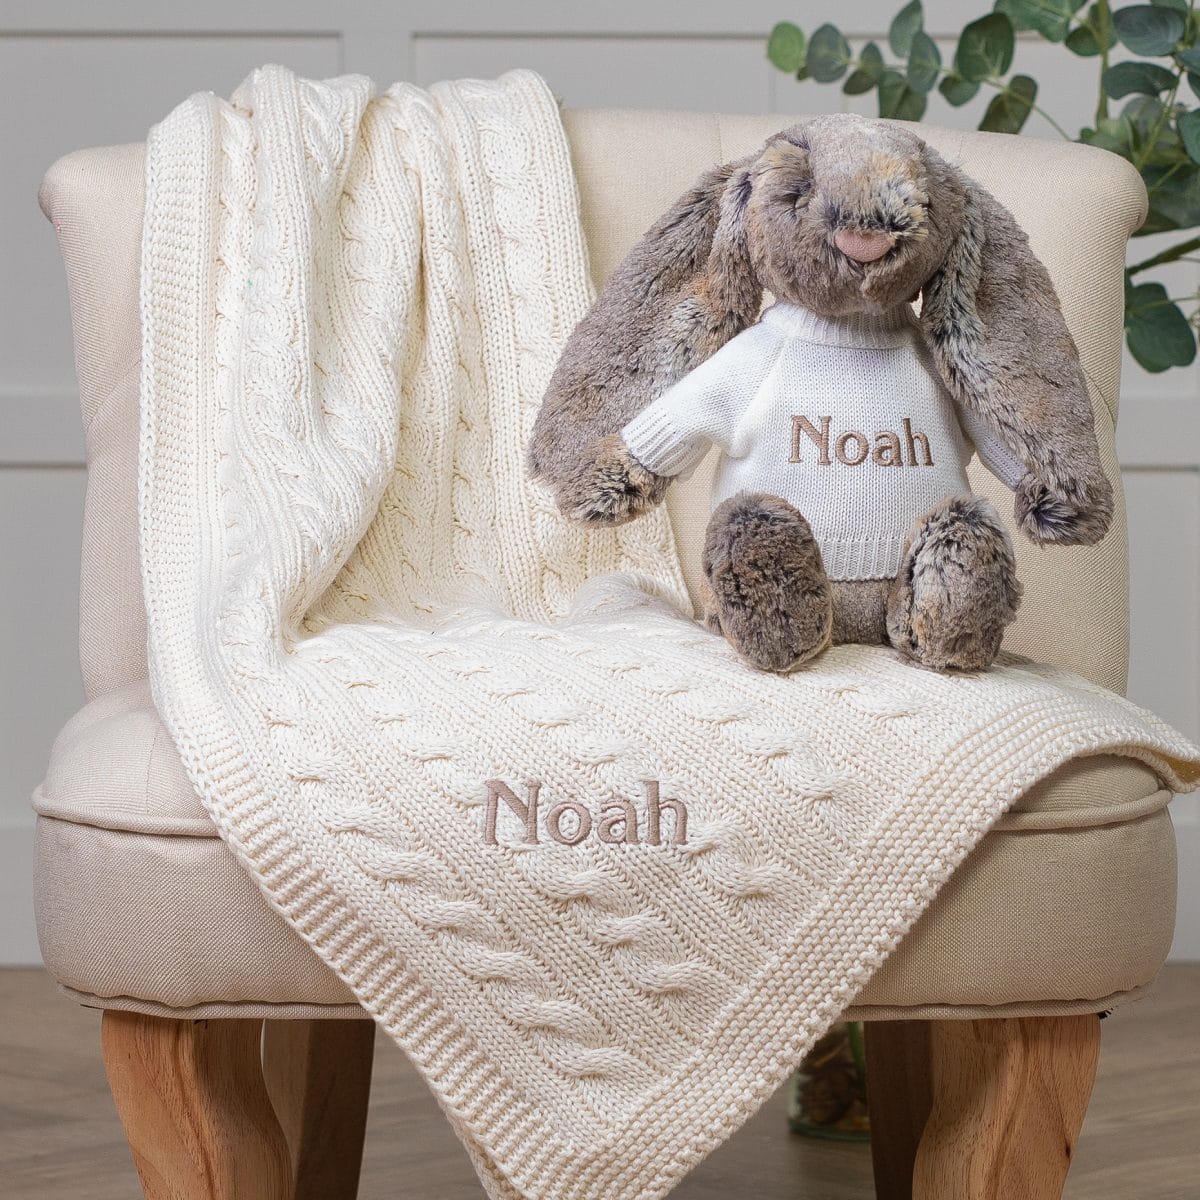 Personalised Toffee Moon luxury cream cable baby blanket and cottontail Jellycat bashful bunny